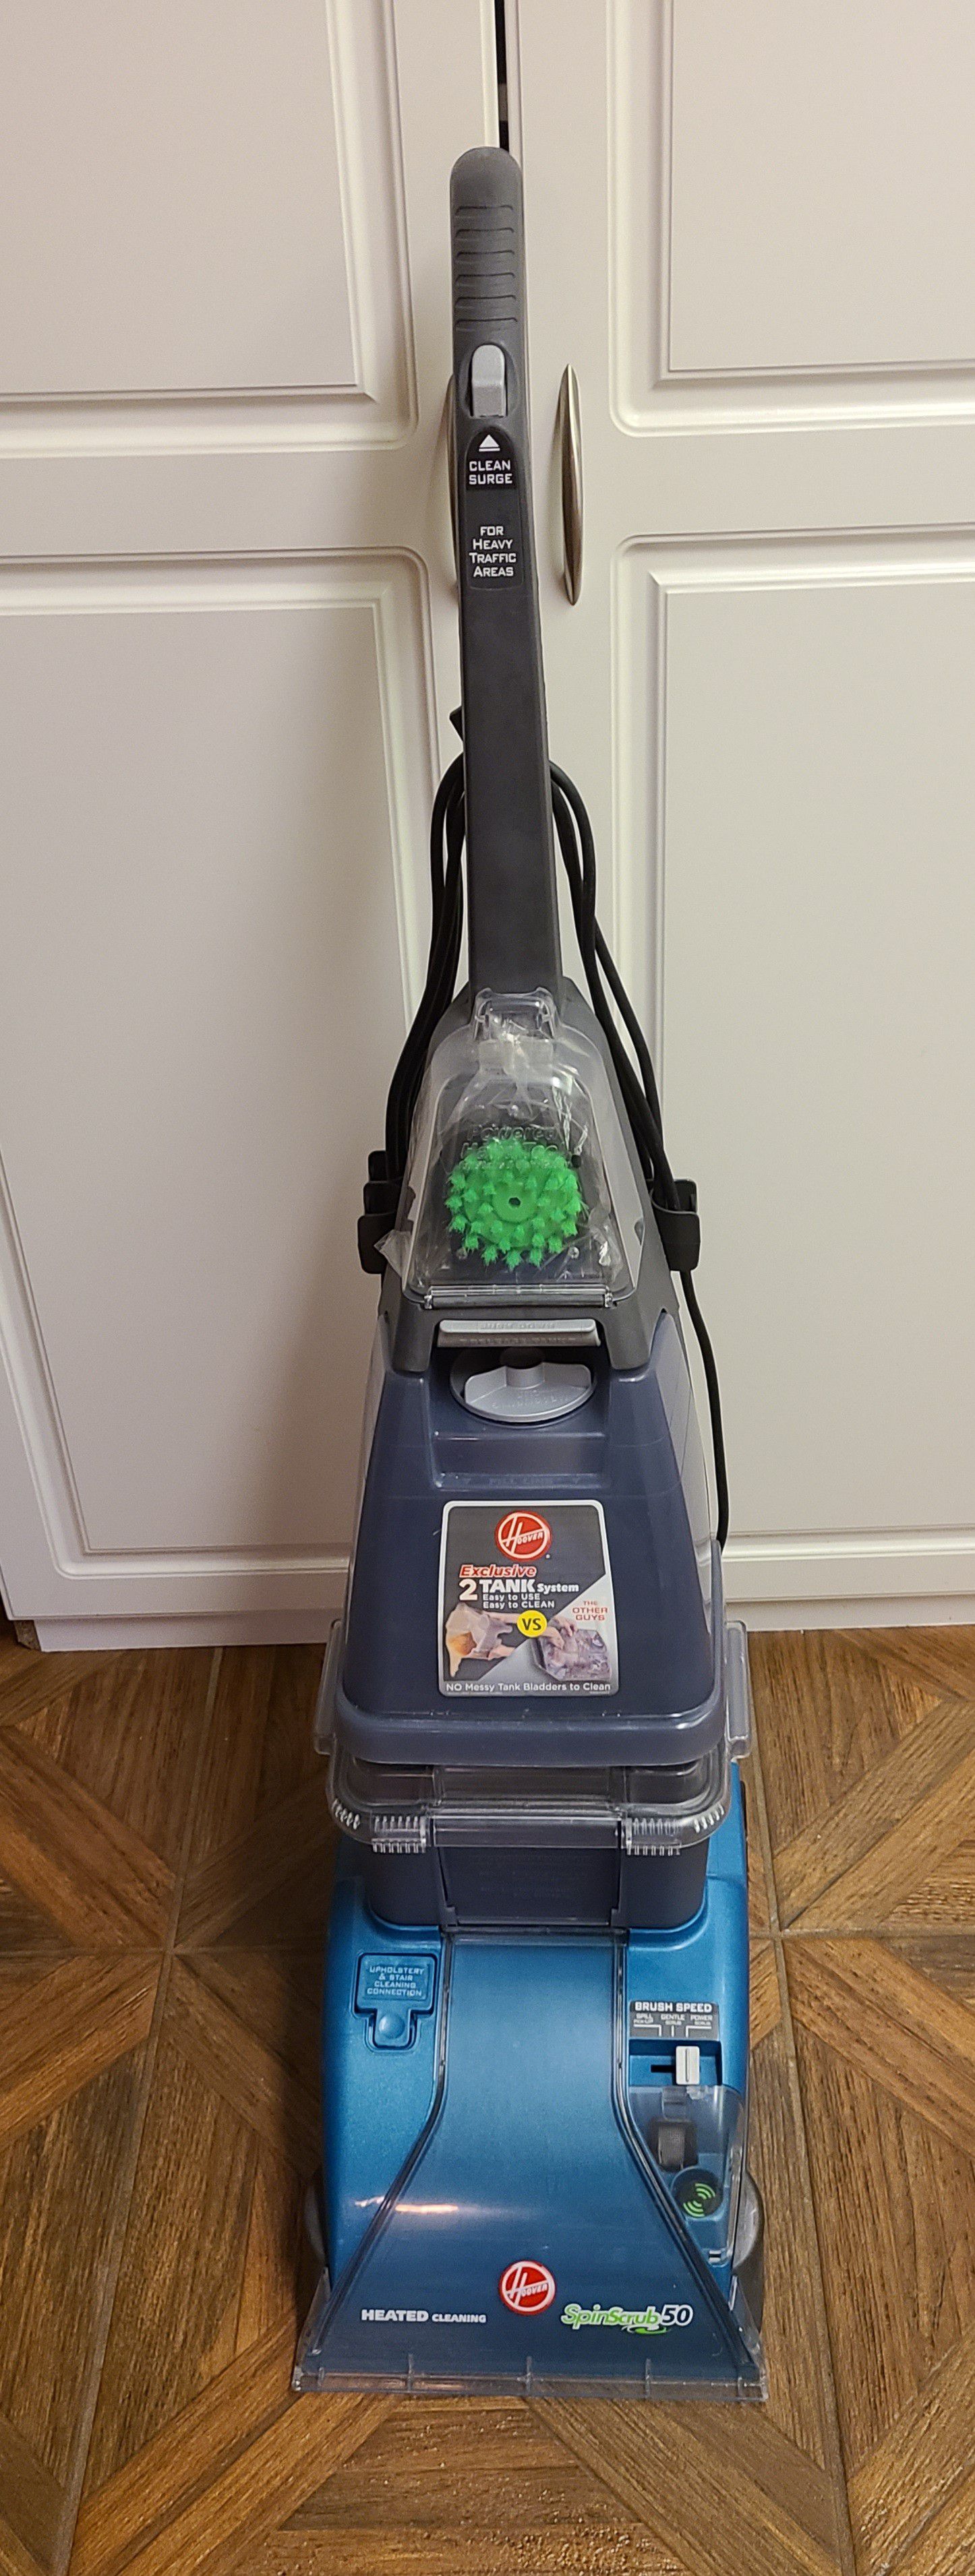 Hoover steam vac carpet cleaner, comes with 6 clean plus all purposes cleaner bottles